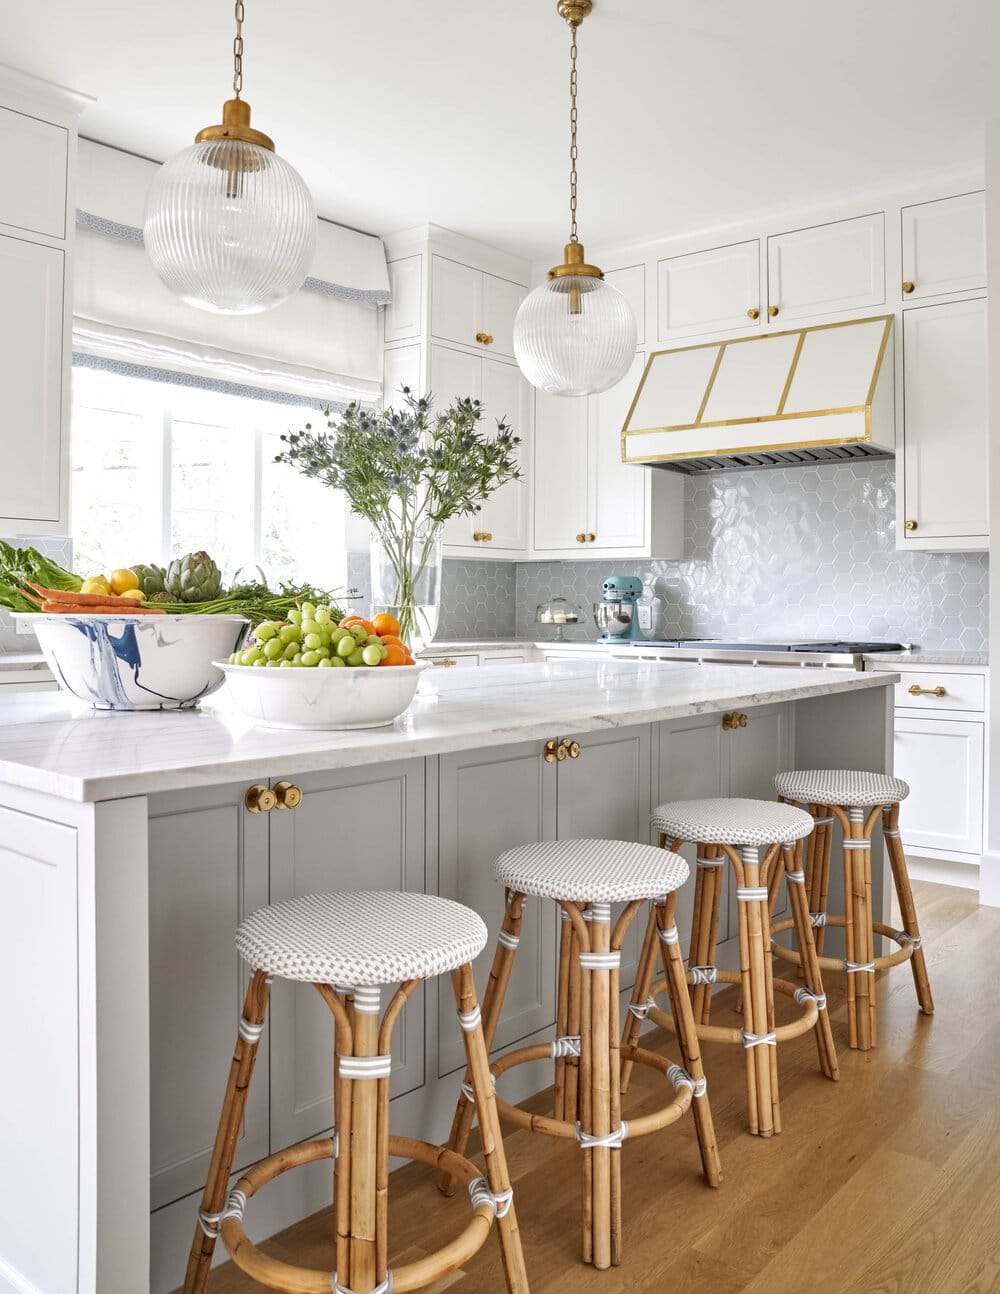 Mary Beth Wagner white kitchen with gold hardware